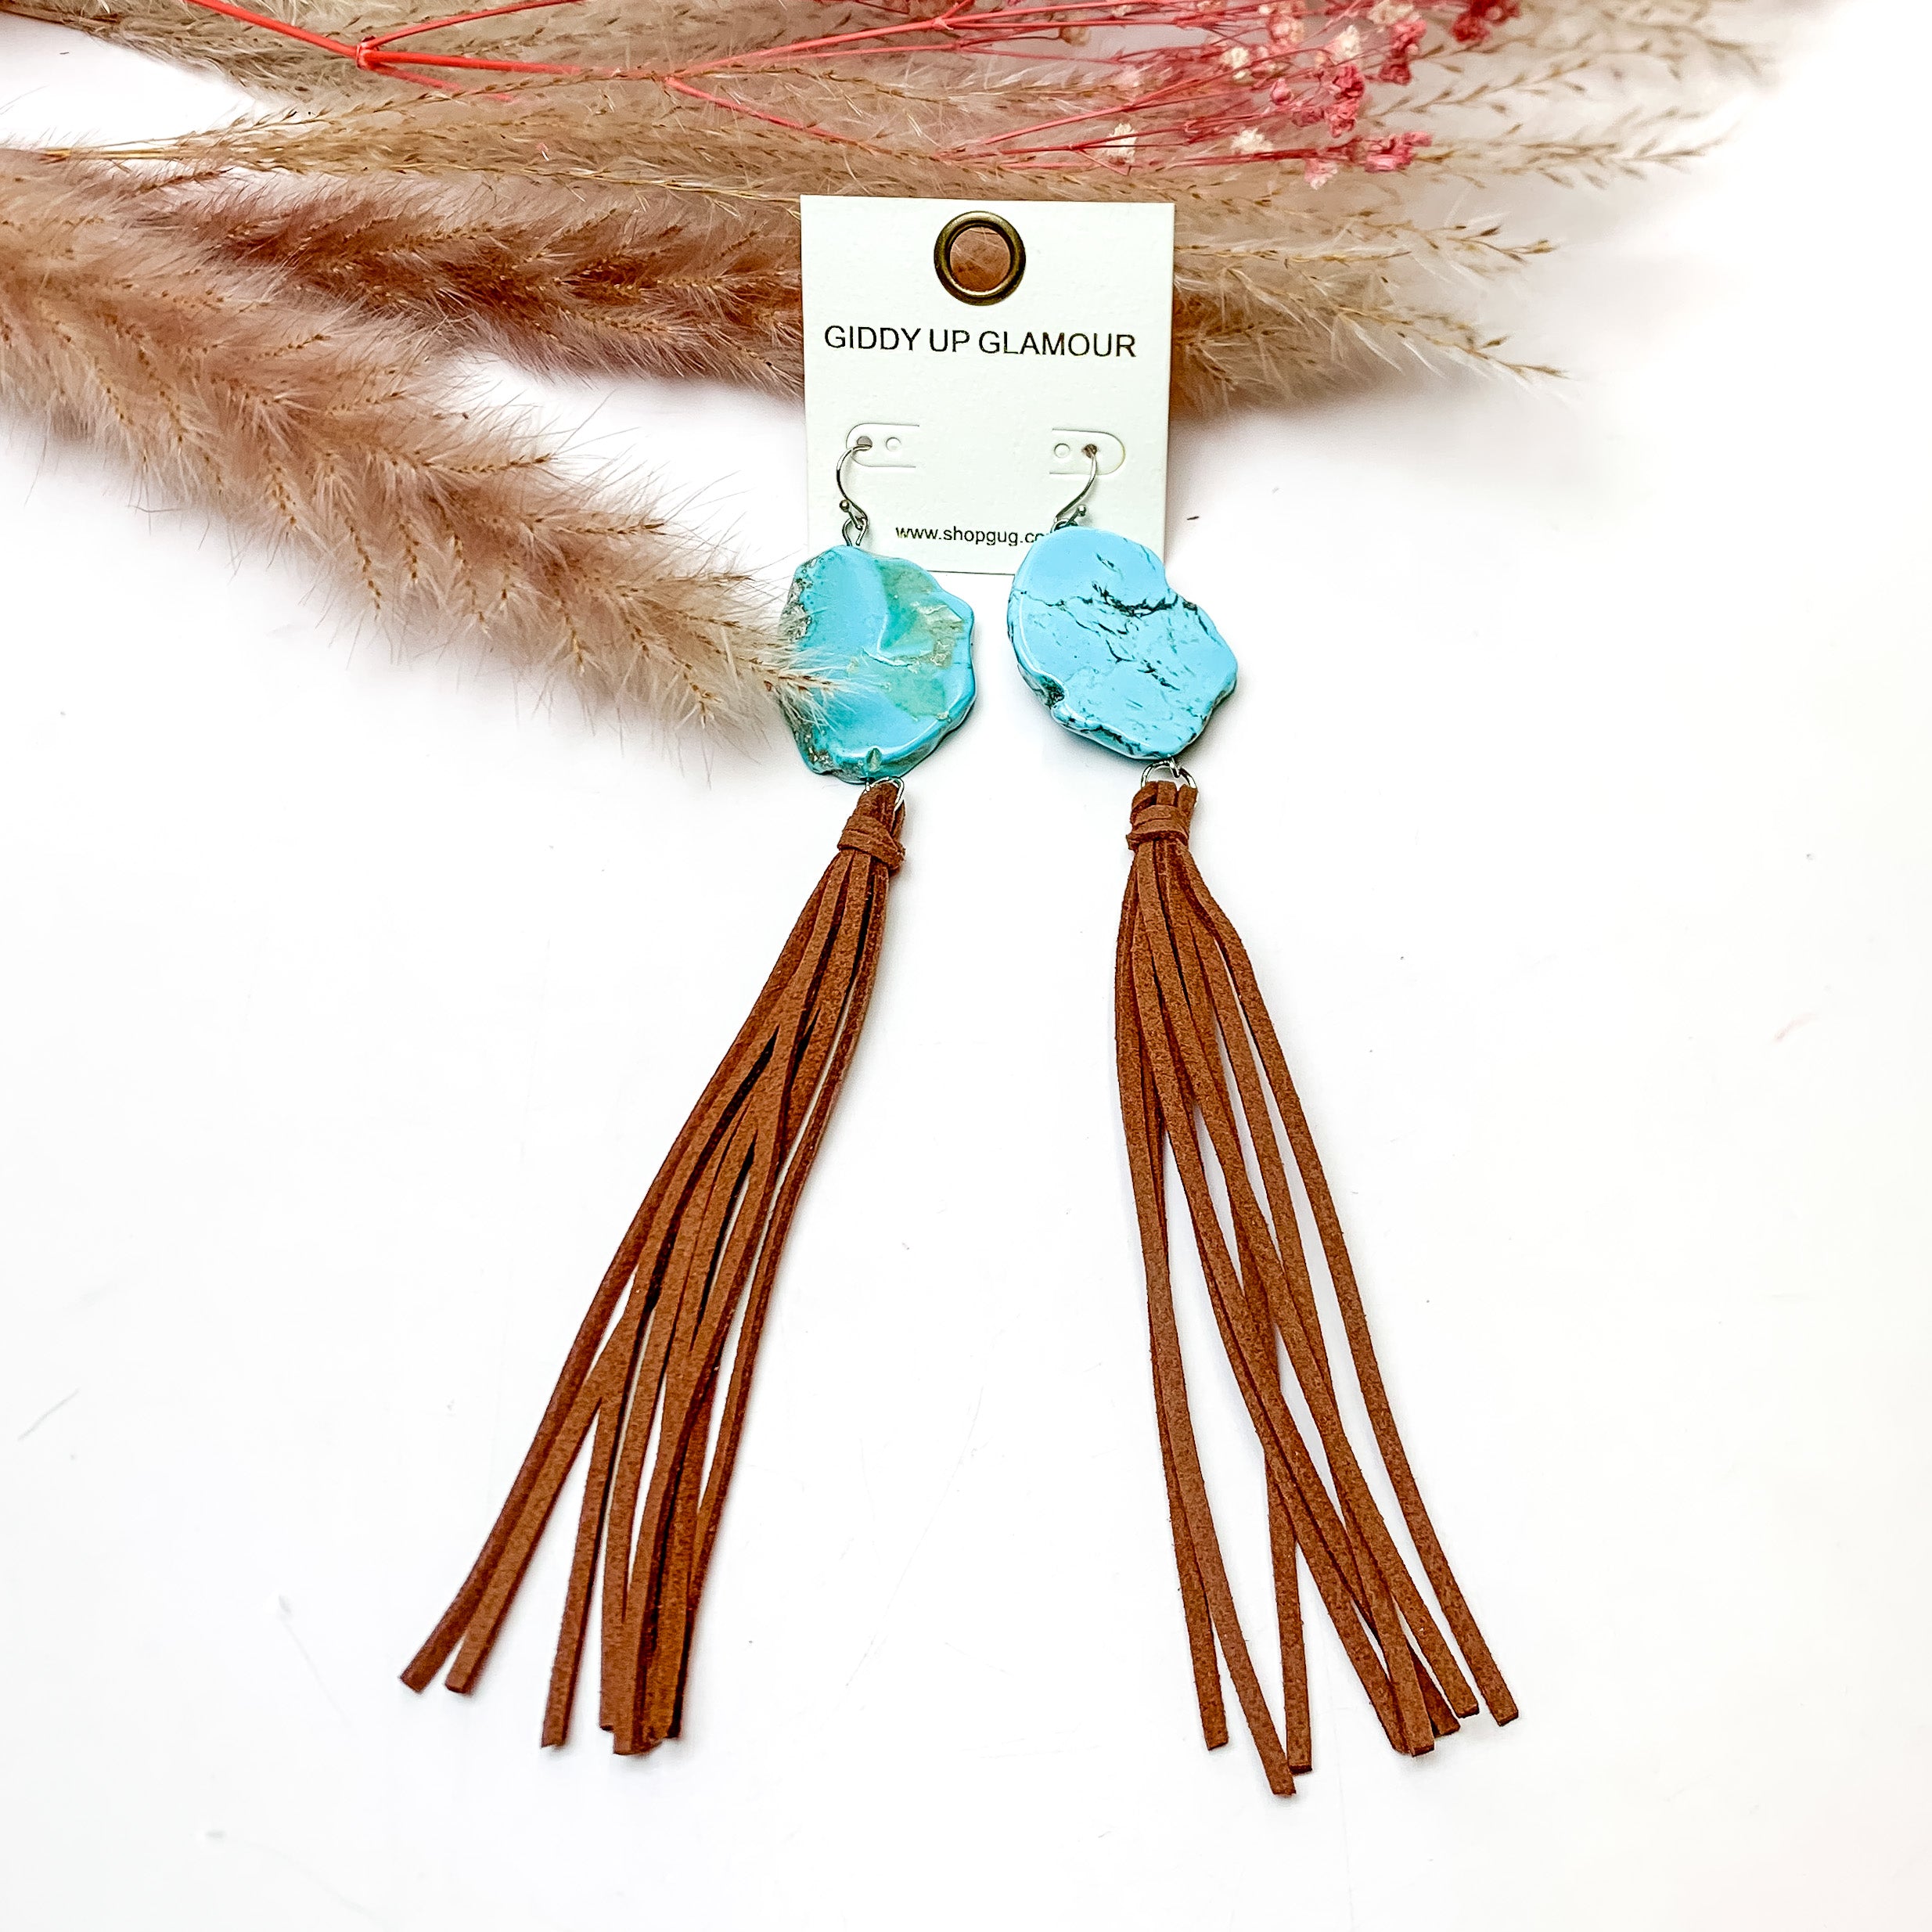 Turquoise Stone Tassel Earrings in Brown. These earrings are pictured on a white background with flowers behind for decoration.